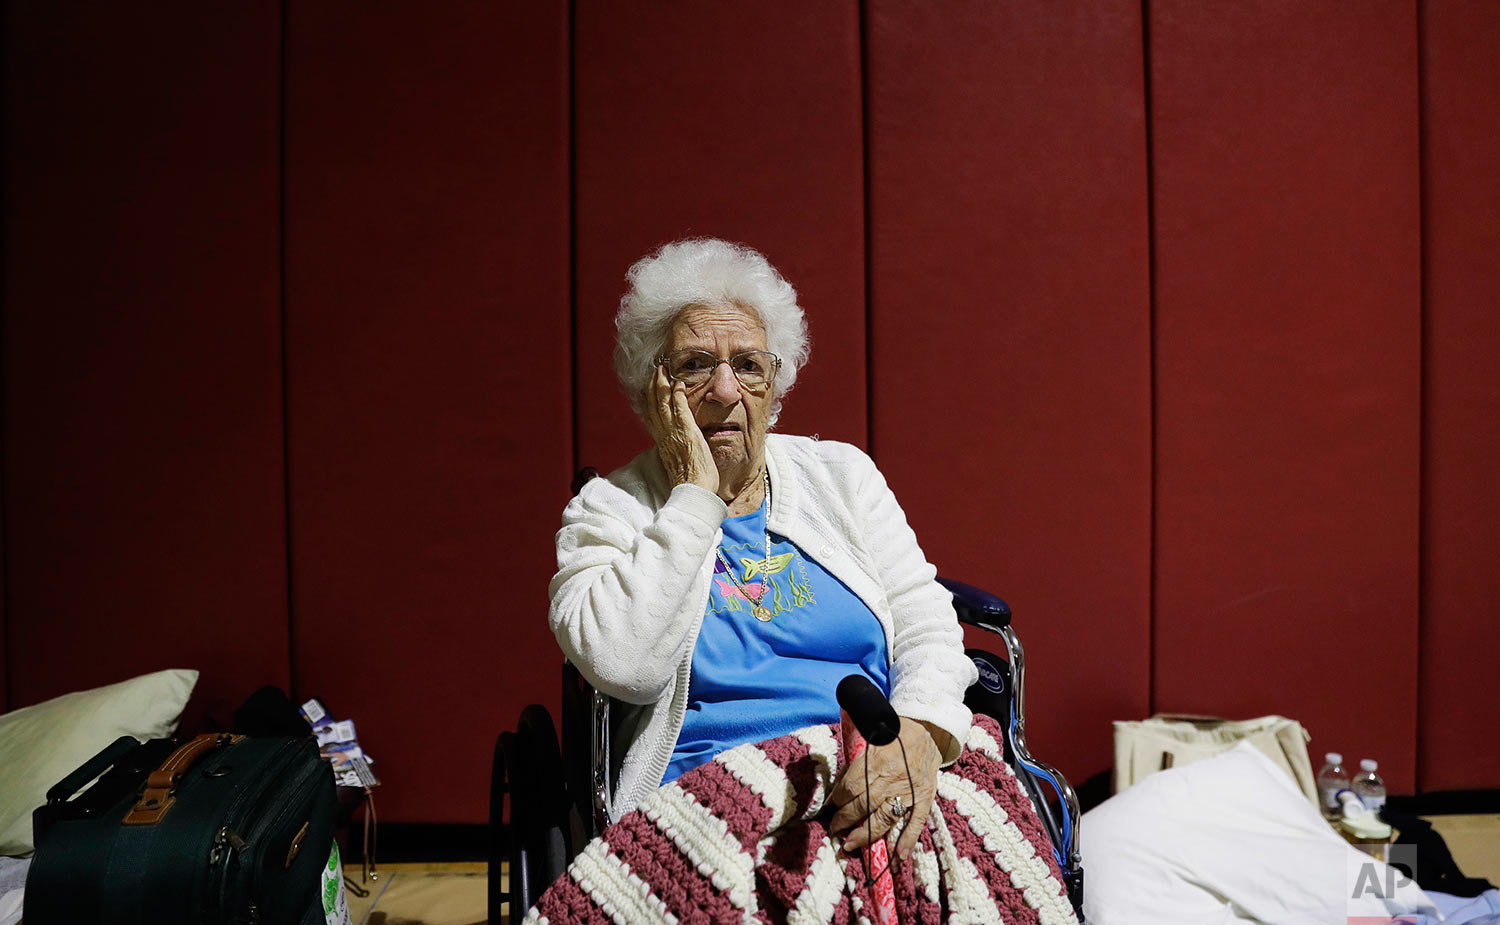  Mary Della Ratta, 94, sits in shelter after evacuating her home with the help of police last night ahead of Hurricane Irma in Naples, Fla., Sunday, Sept. 10, 2017. "I'm afraid of what's going to happen. I don't know what I'll find when I go home," s